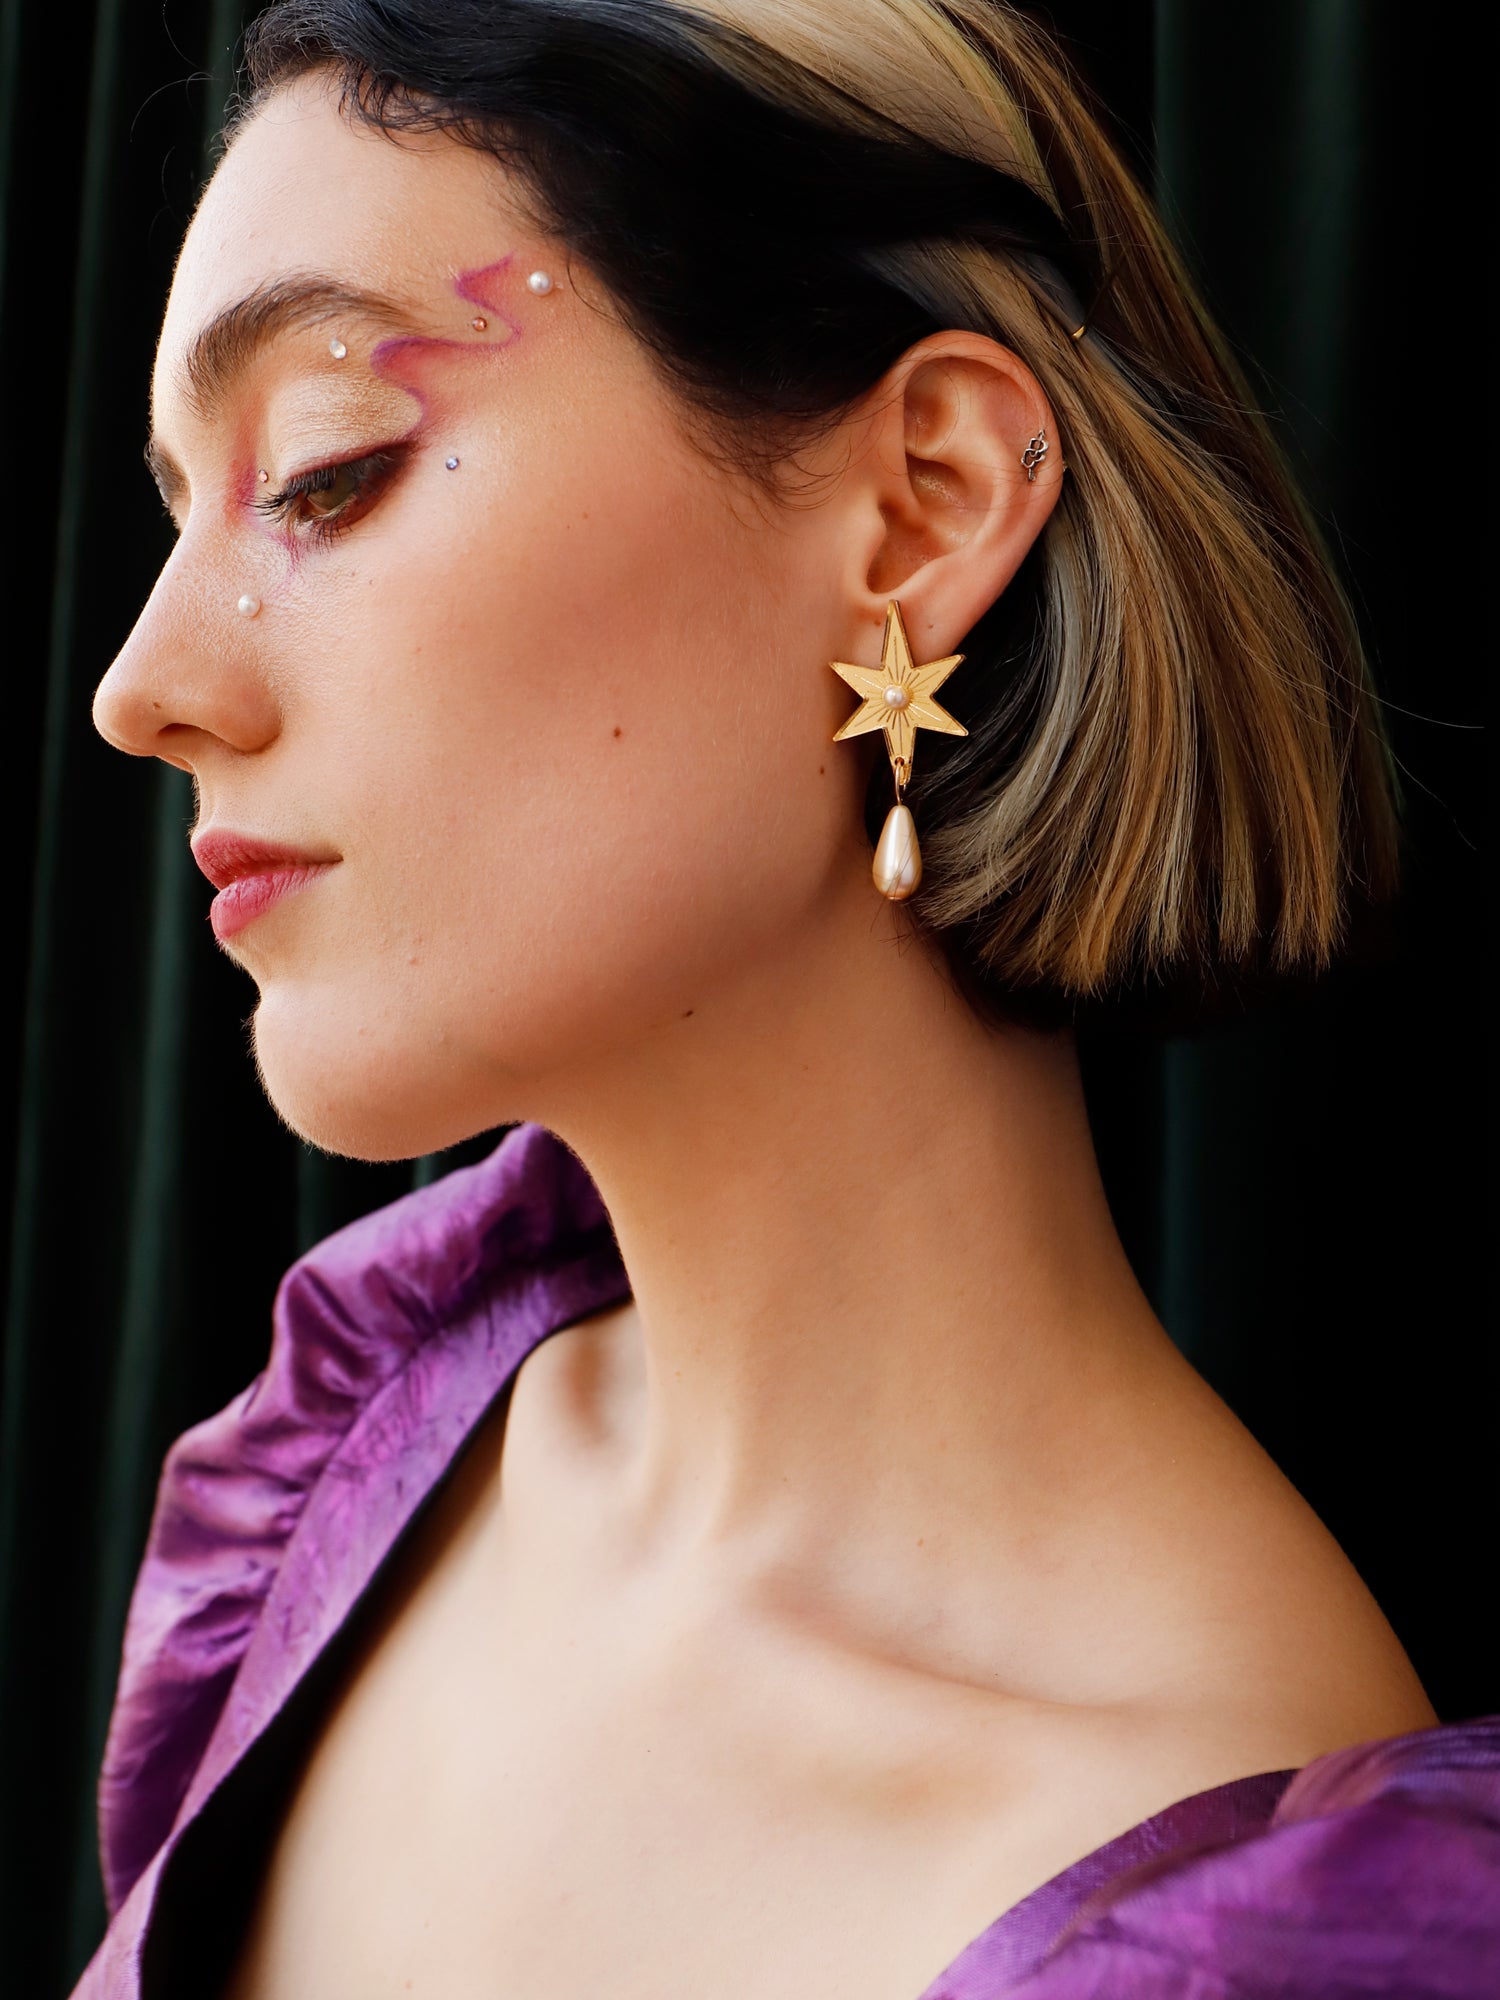 Statement star studs made with gold mirrored acrylic, embellished with glass pearl and bead details. Handmade in London by Wolf & Moon.